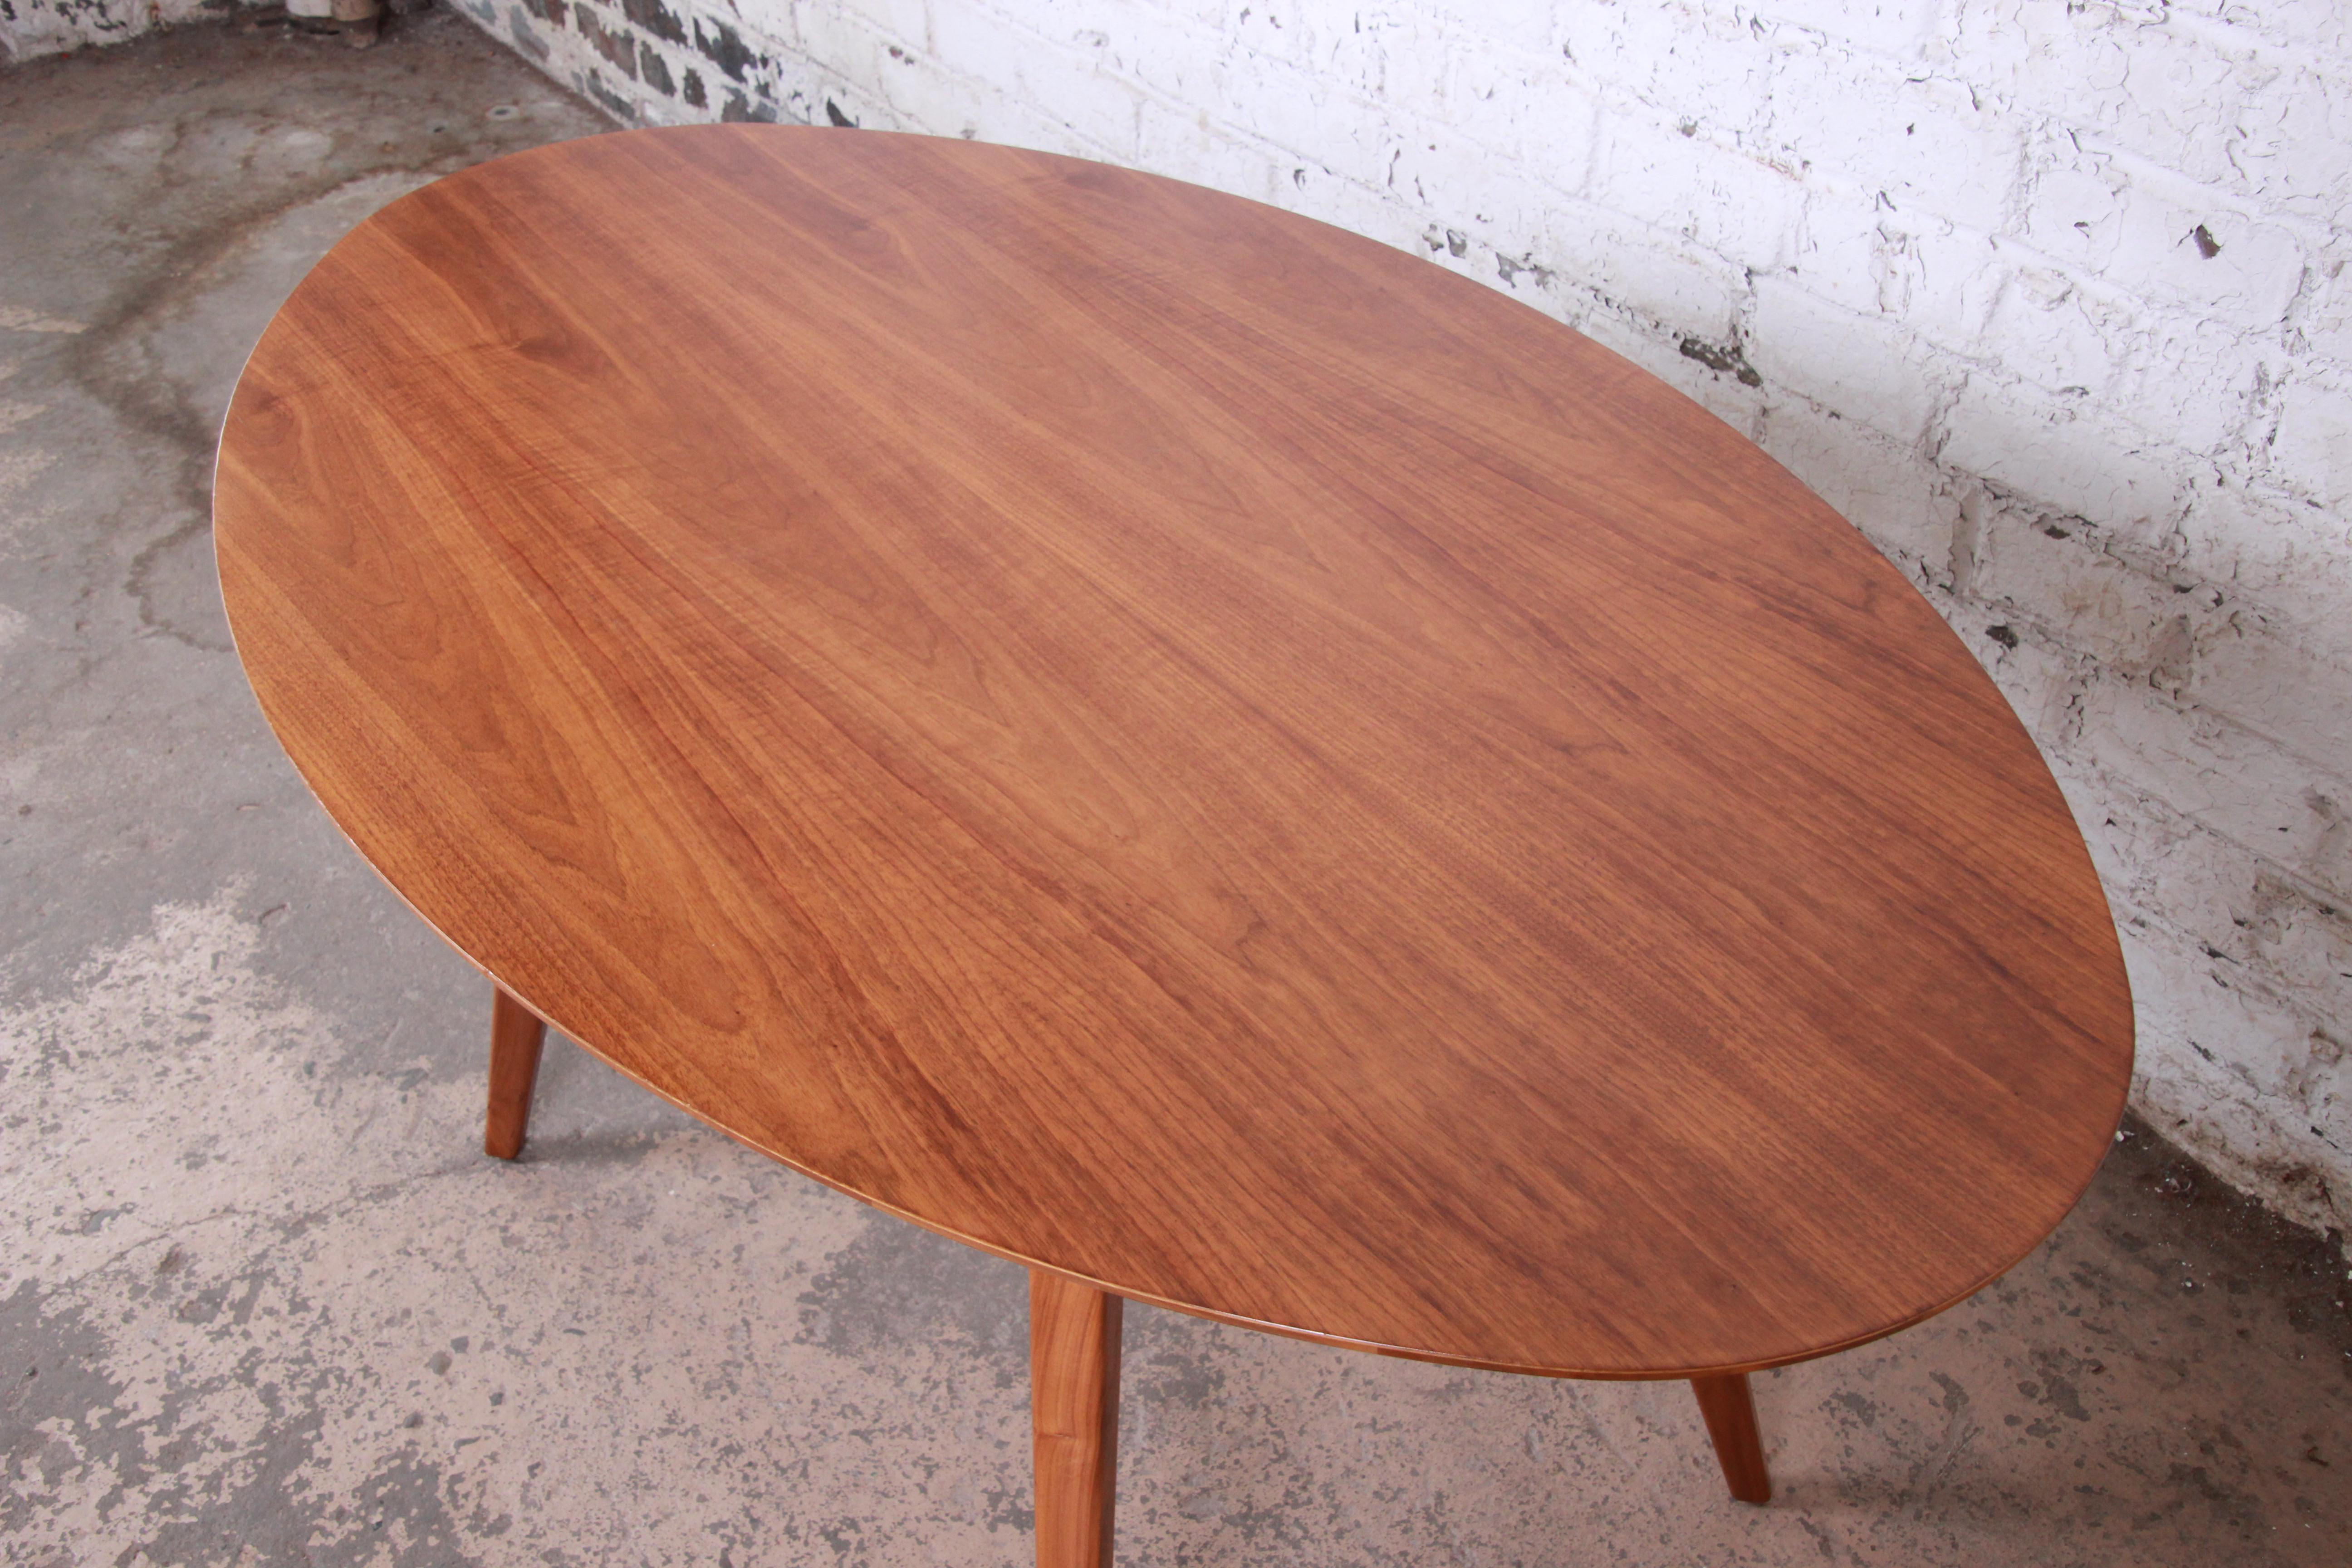 20th Century Jens Risom for Knoll Walnut Elliptical Dining or Game Table